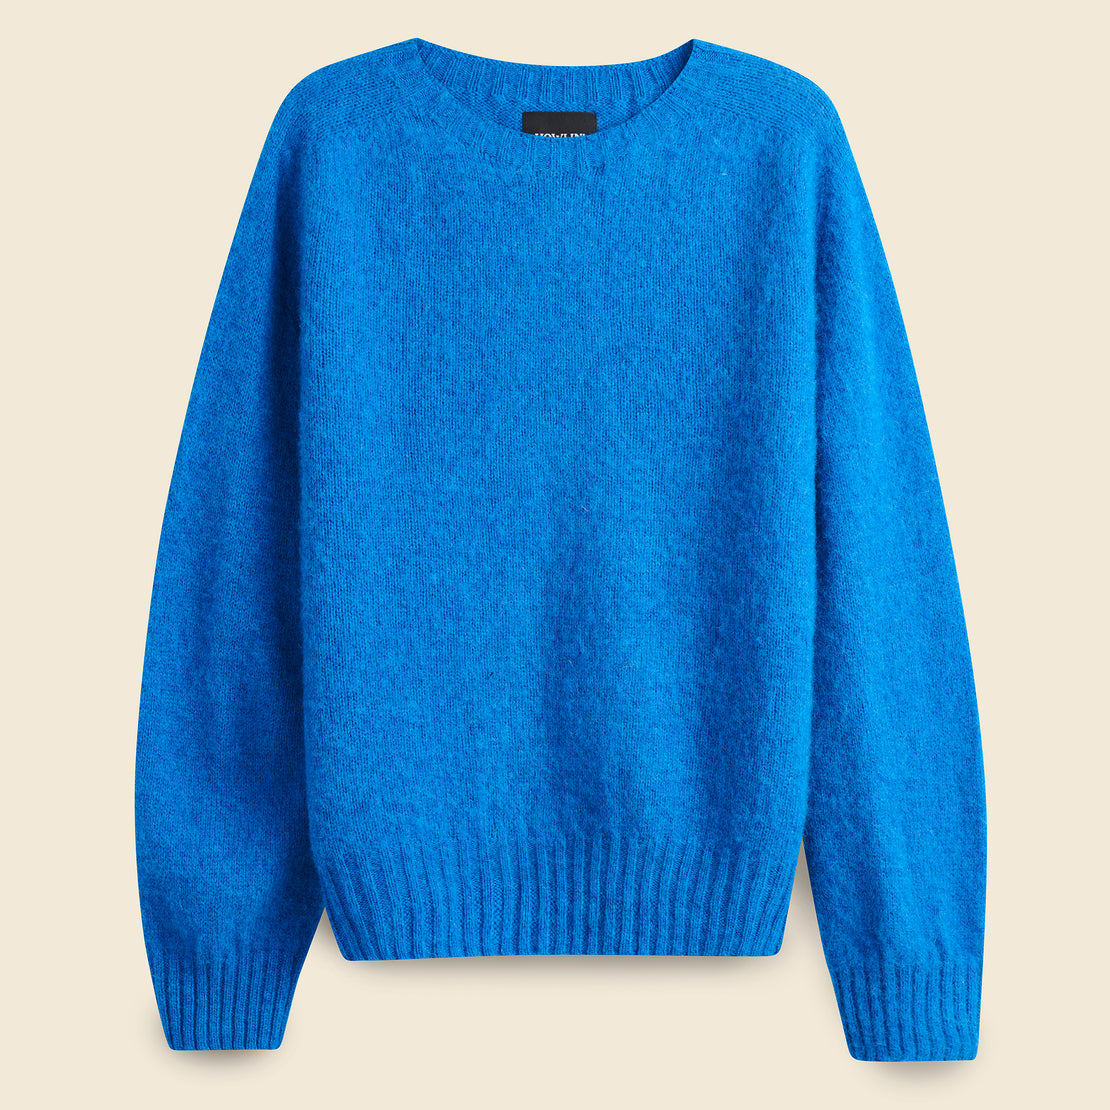 Howlin ForeverNeverMore Sweater - Trance Blue